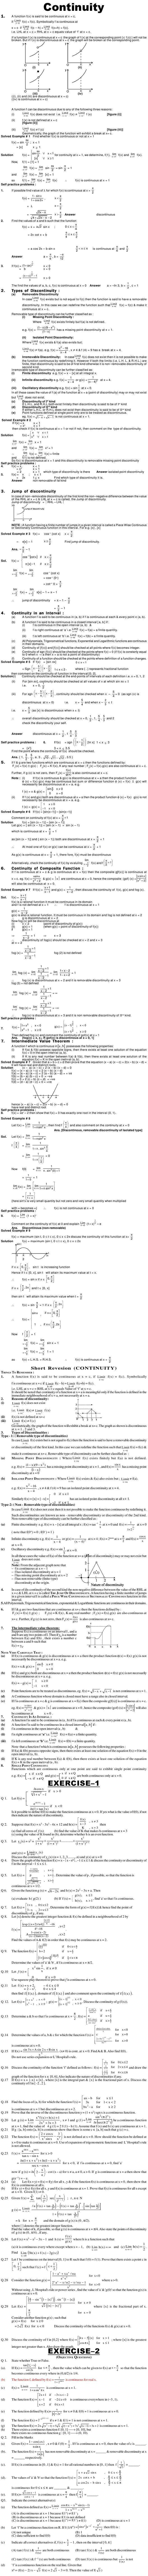 Maths Study Material - Chapter 10